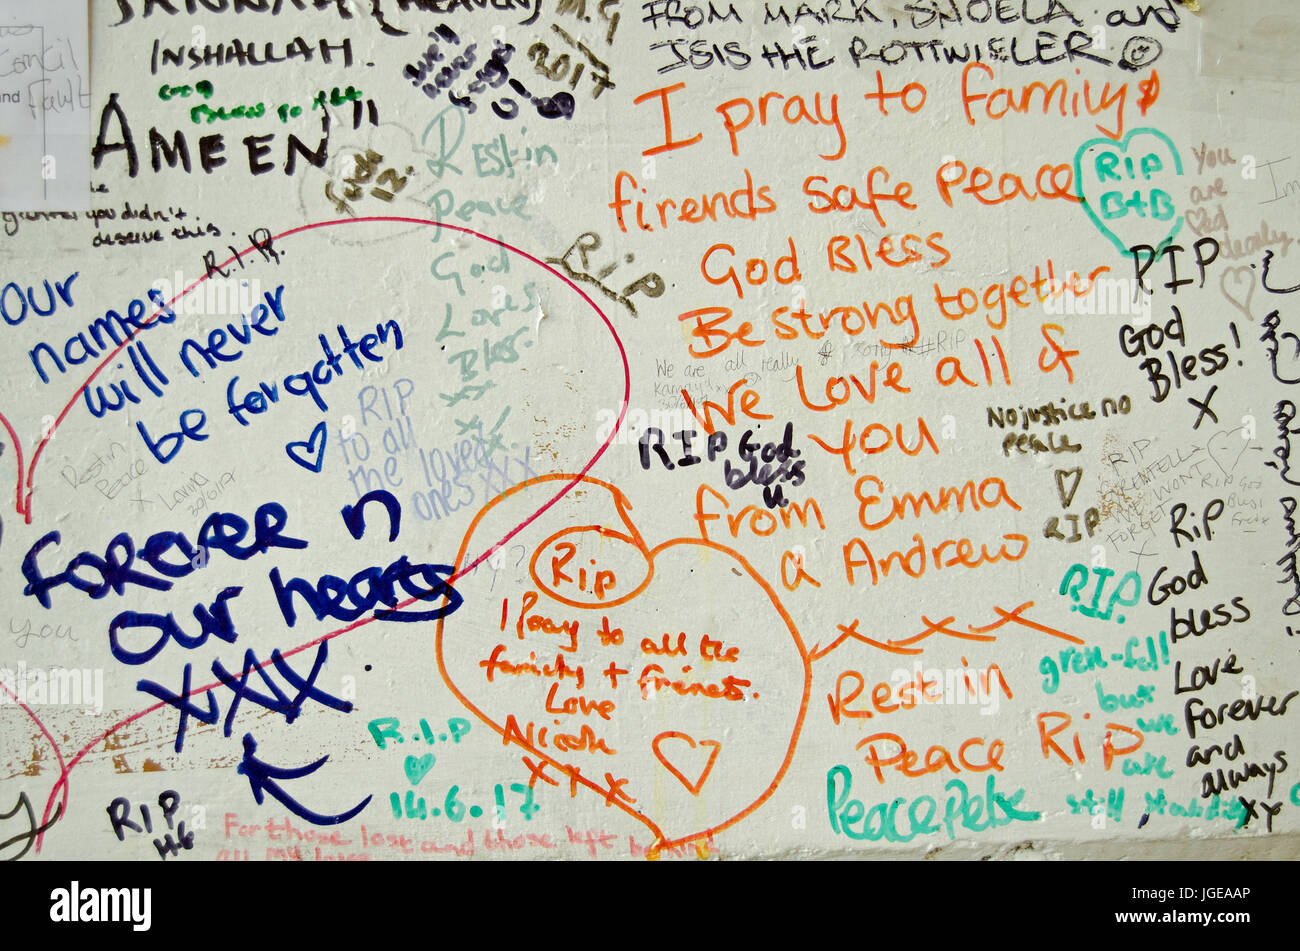 LONDON, UK - JULY 6, 2017:  Memorial messages written on a wall close too the Grenfell Tower block of council flats in which at least 80 people are fe Stock Photo